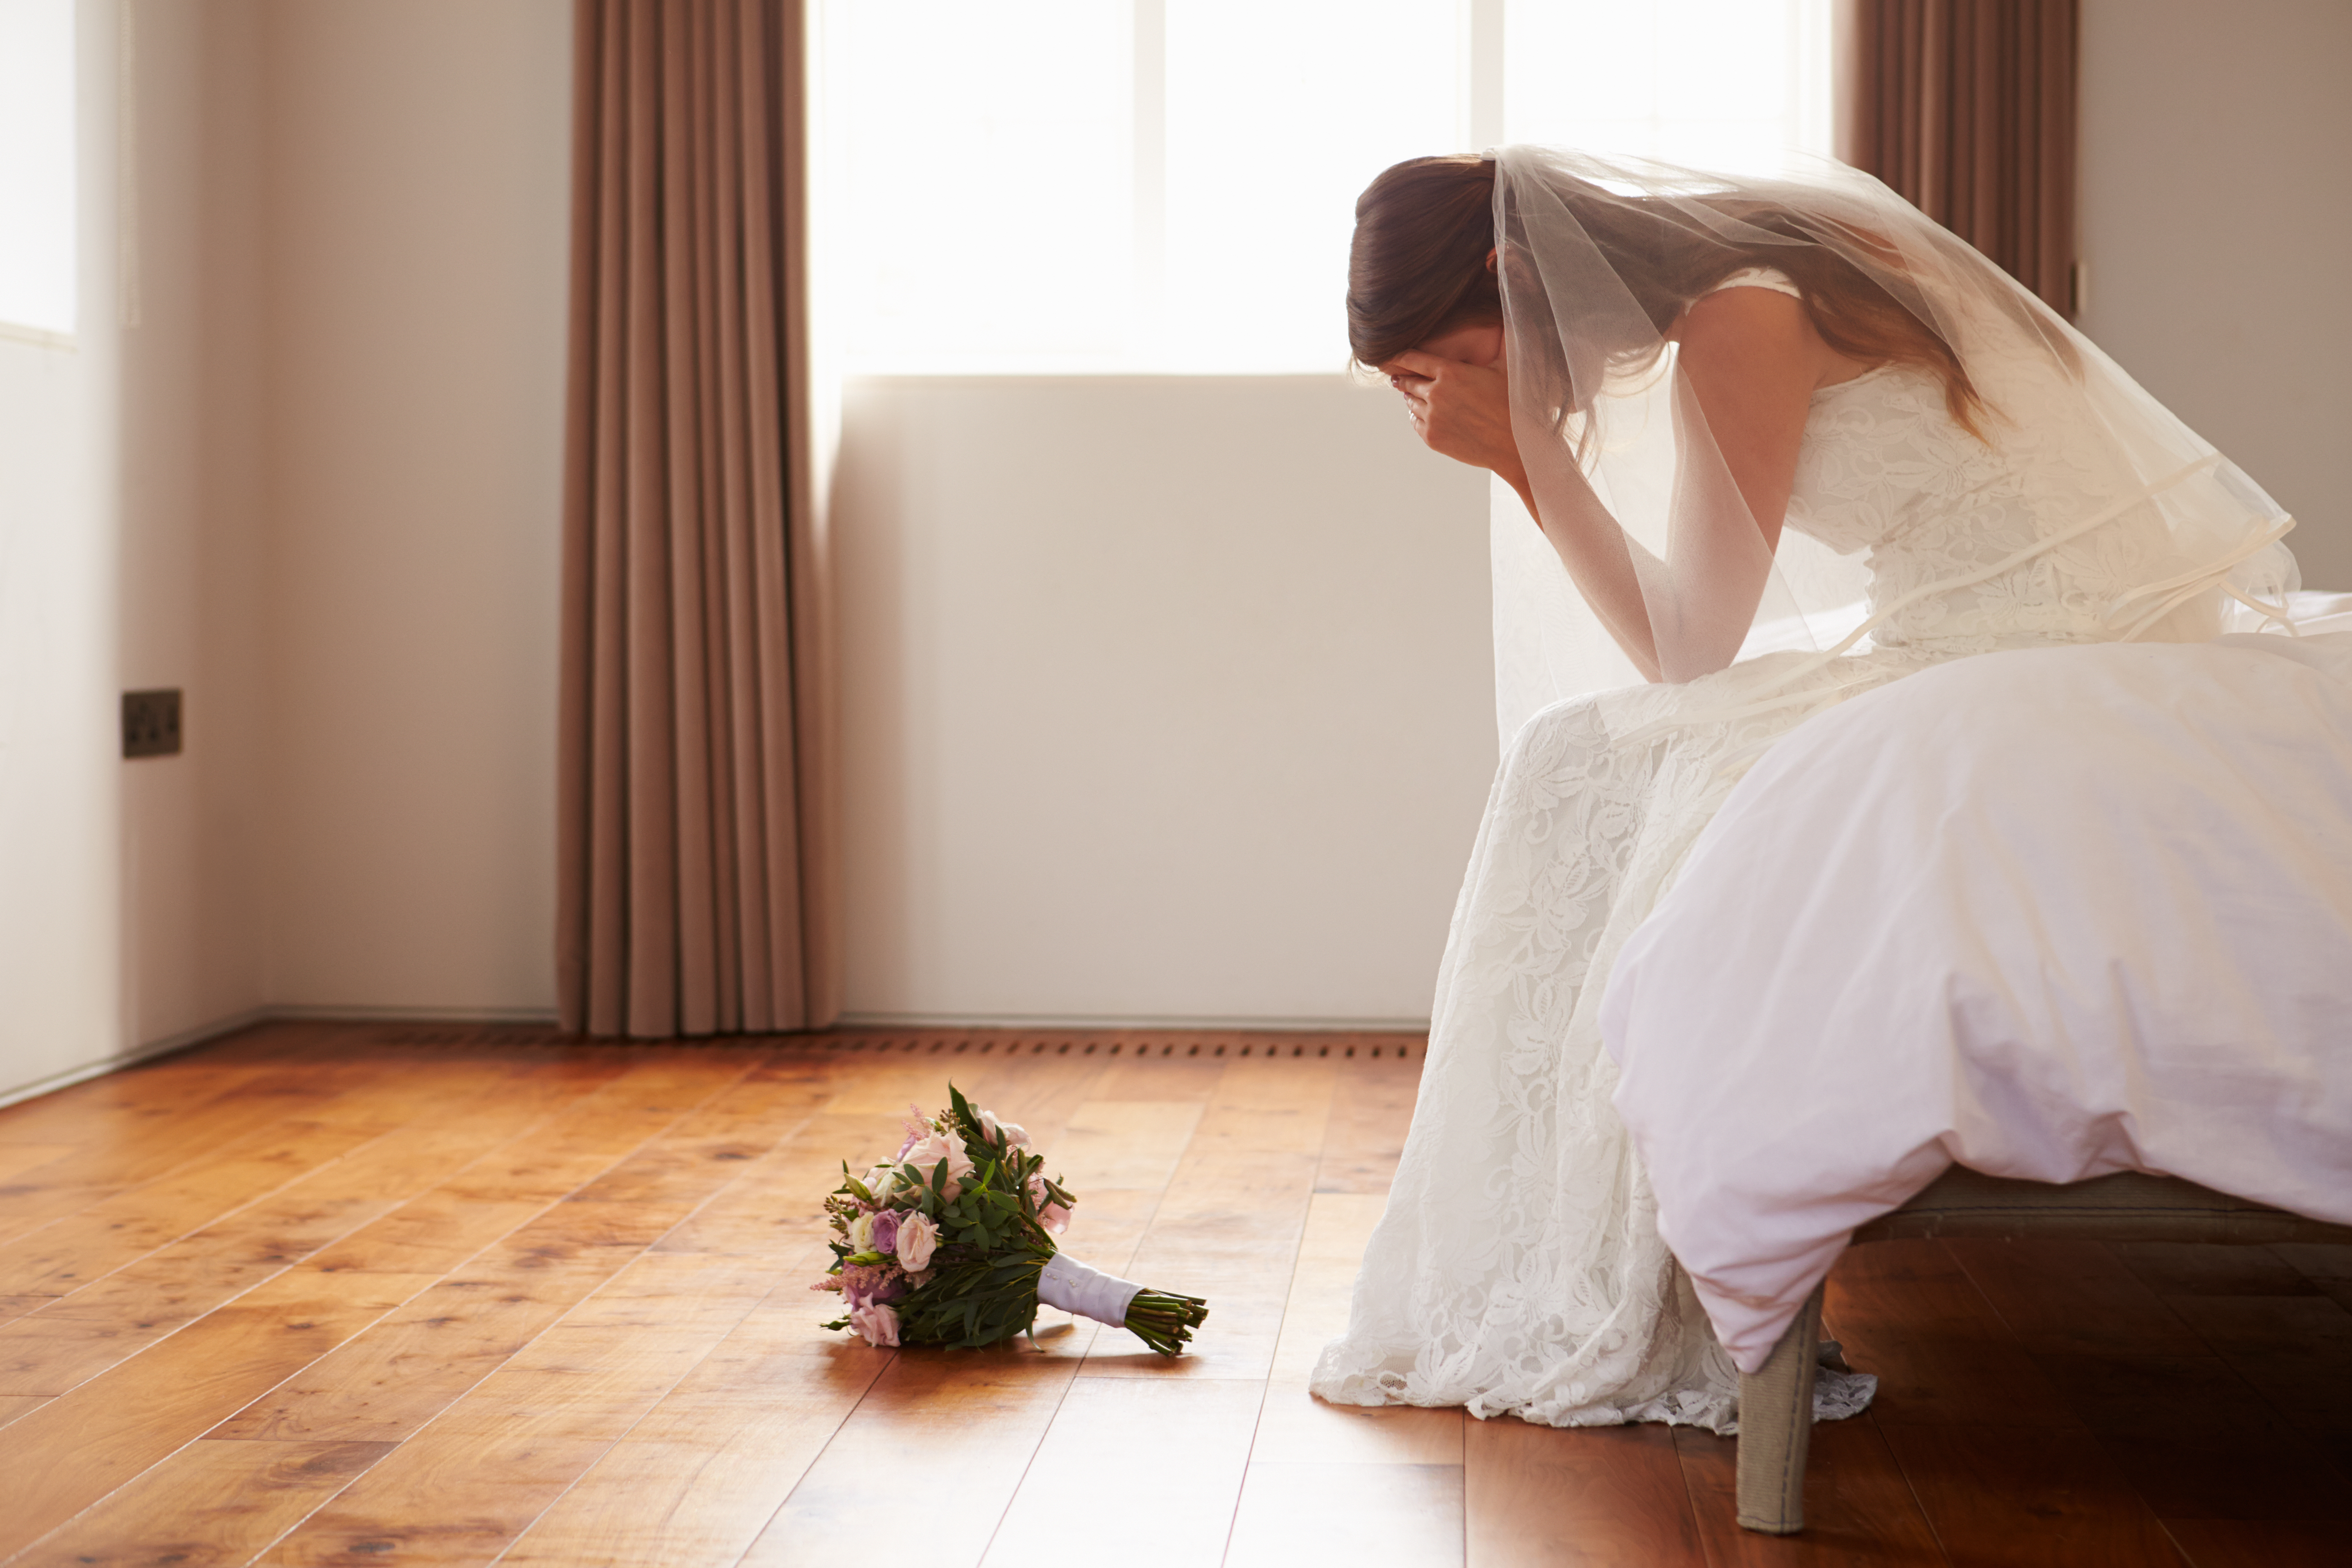 A sad bride in her room | Source: Getty Images